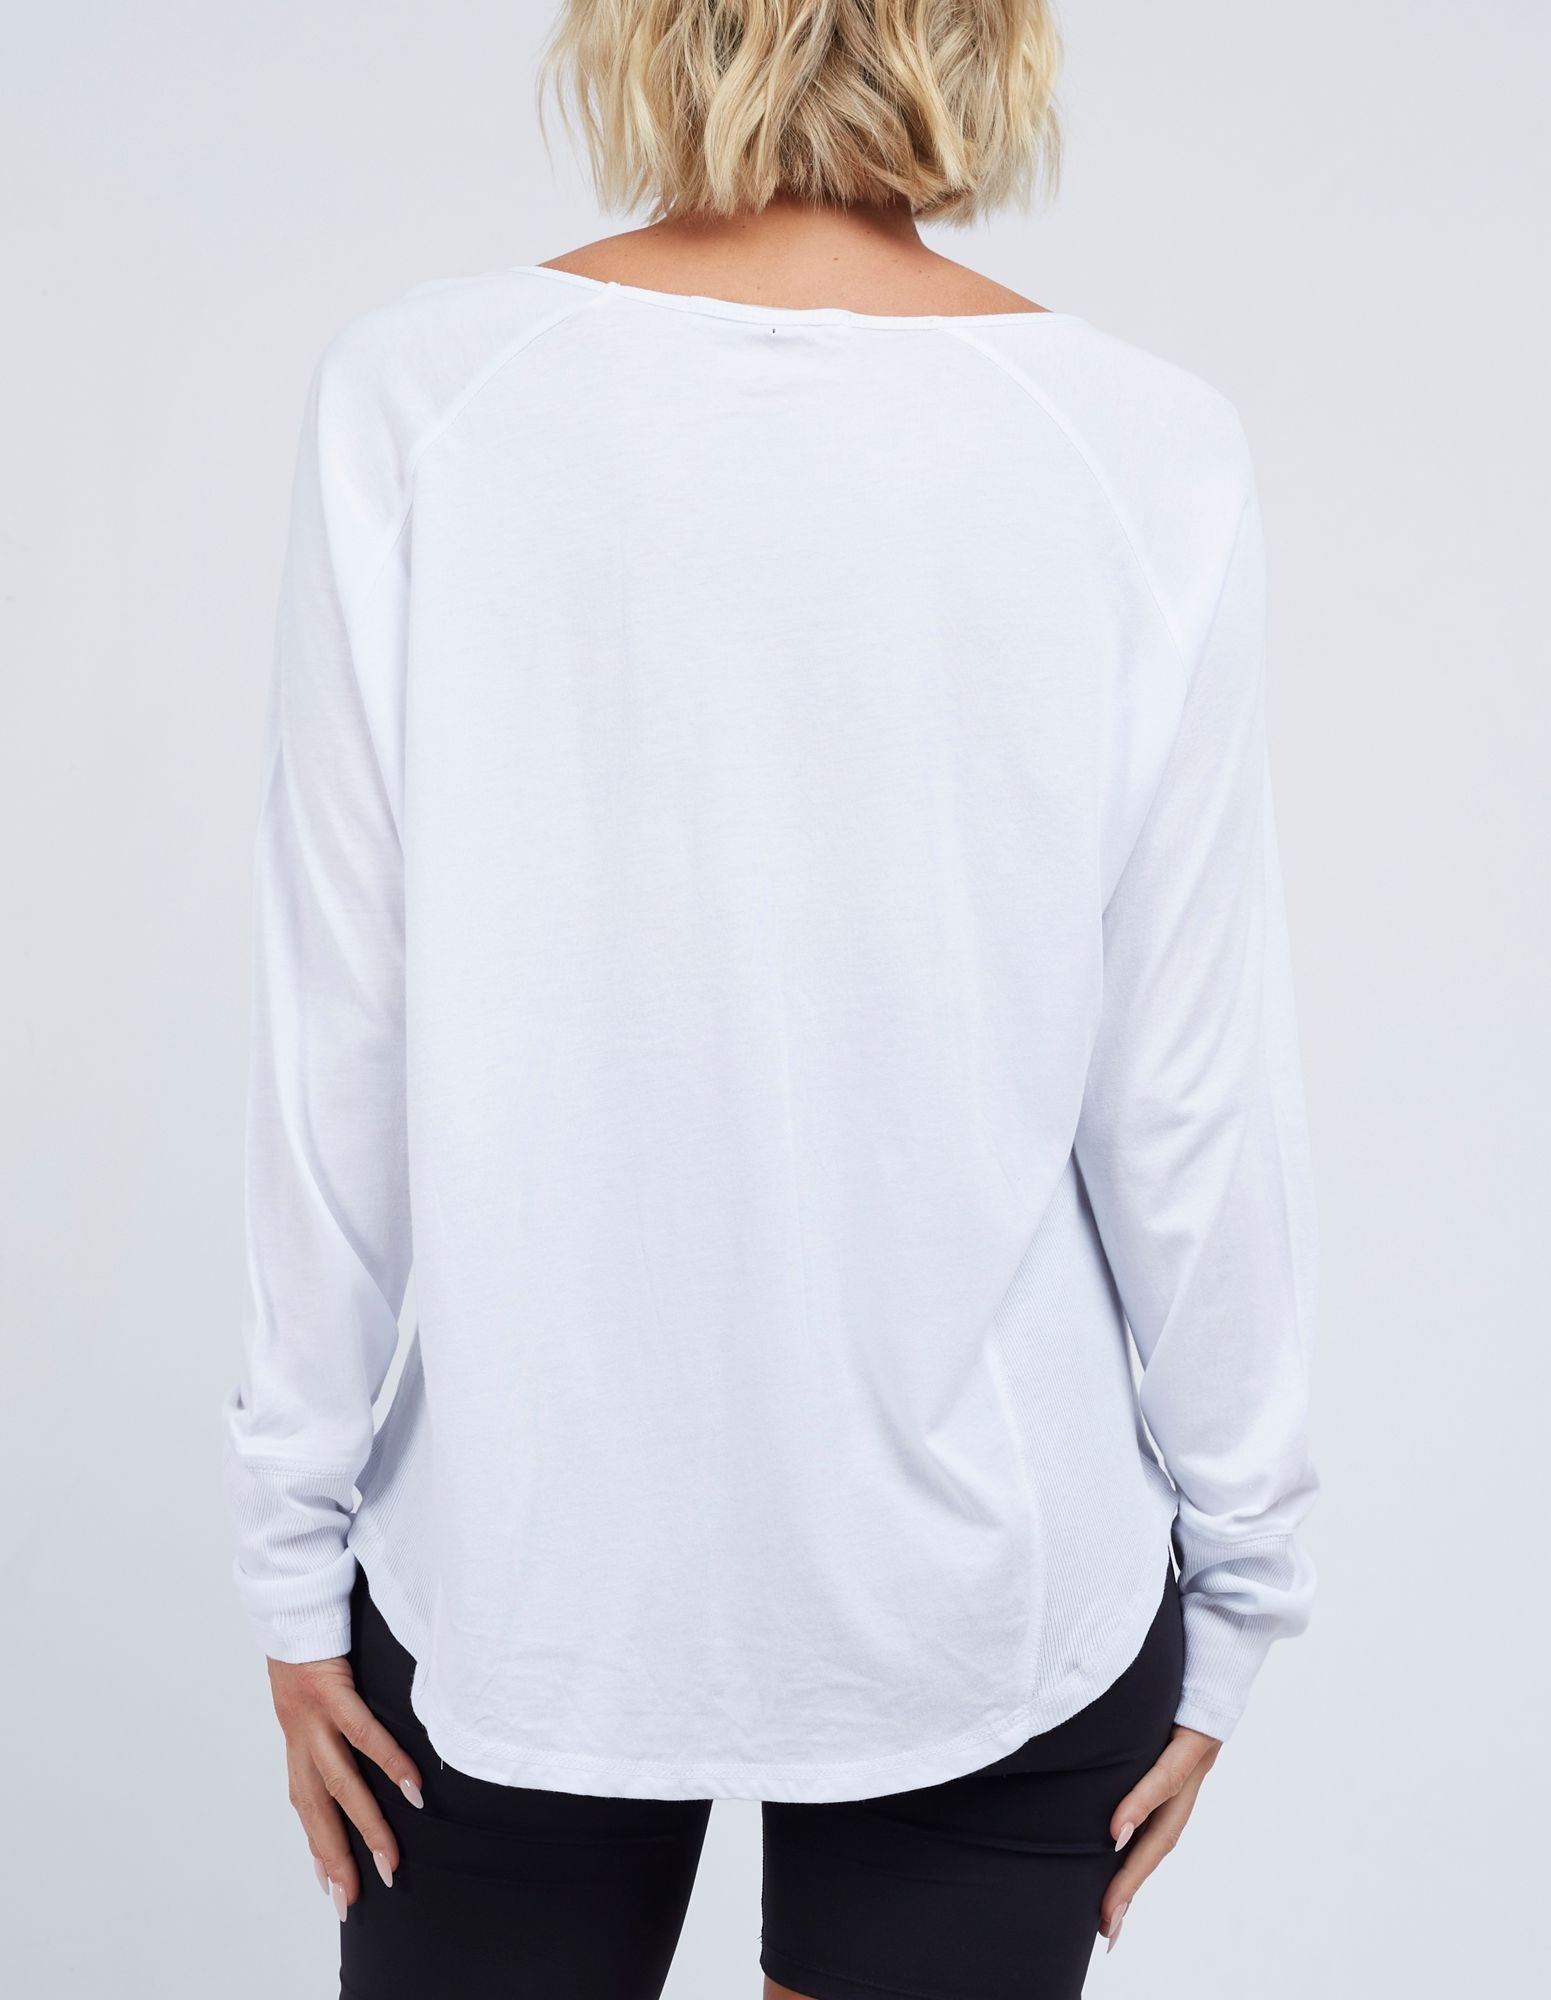 Extend L/S Tee - White - Foxwood - FUDGE Gifts Home Lifestyle